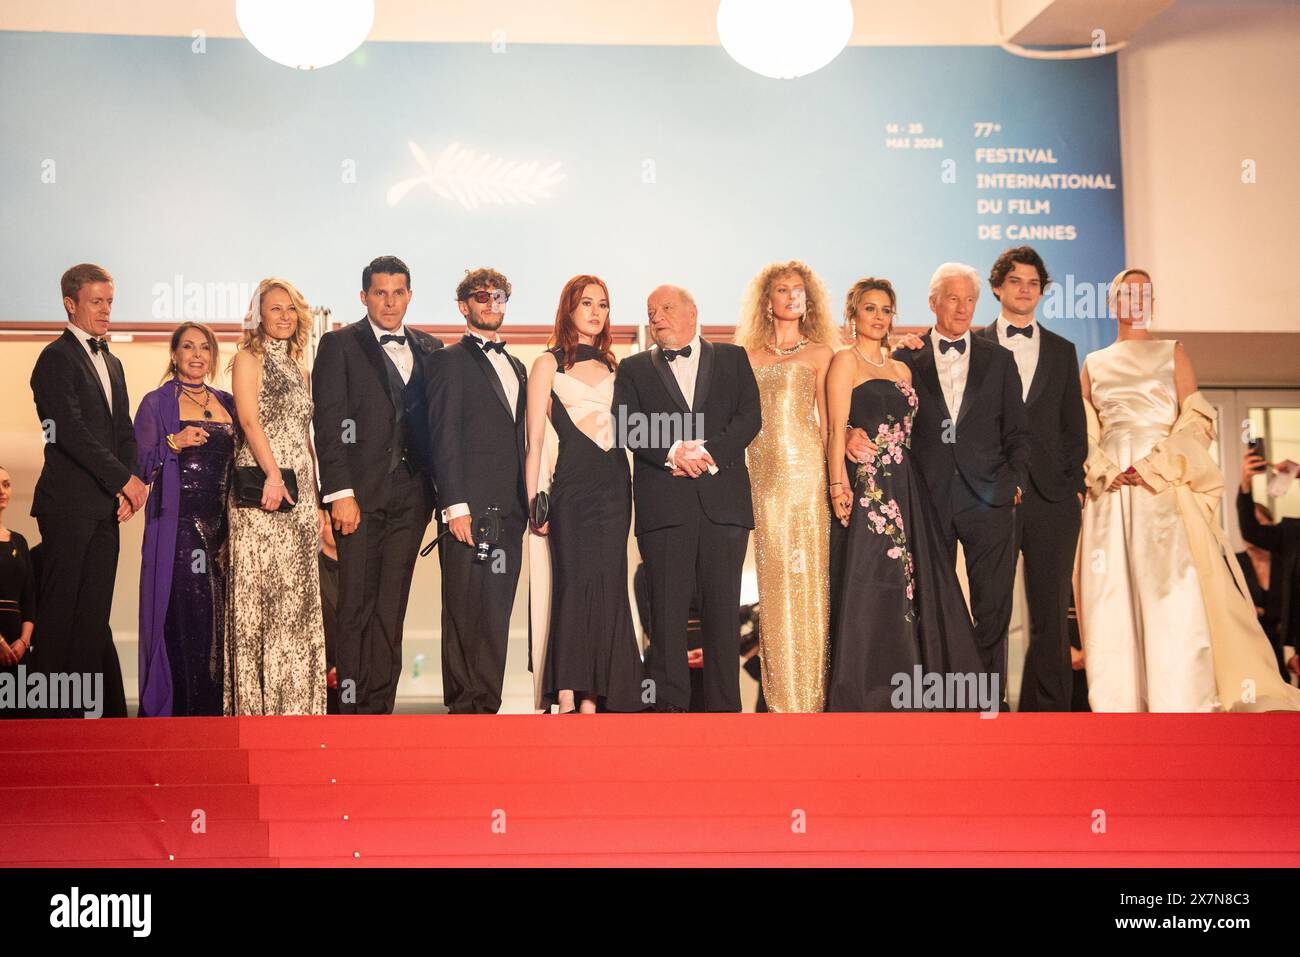 (L-R) Scott Lastaiti, Luisa Law, Tiffany Boyle, Andrew Wonder, Taylor Jeanne, Paul Schrader, Penelope Mitchell, Alejandra Silva, Richard Gere, Homer James Jigme Gere, Uma Thurman attend the 'Oh, Canada' Red Carpet at the 77th annual Cannes Film Festival at Palais des Festivals. Stock Photo